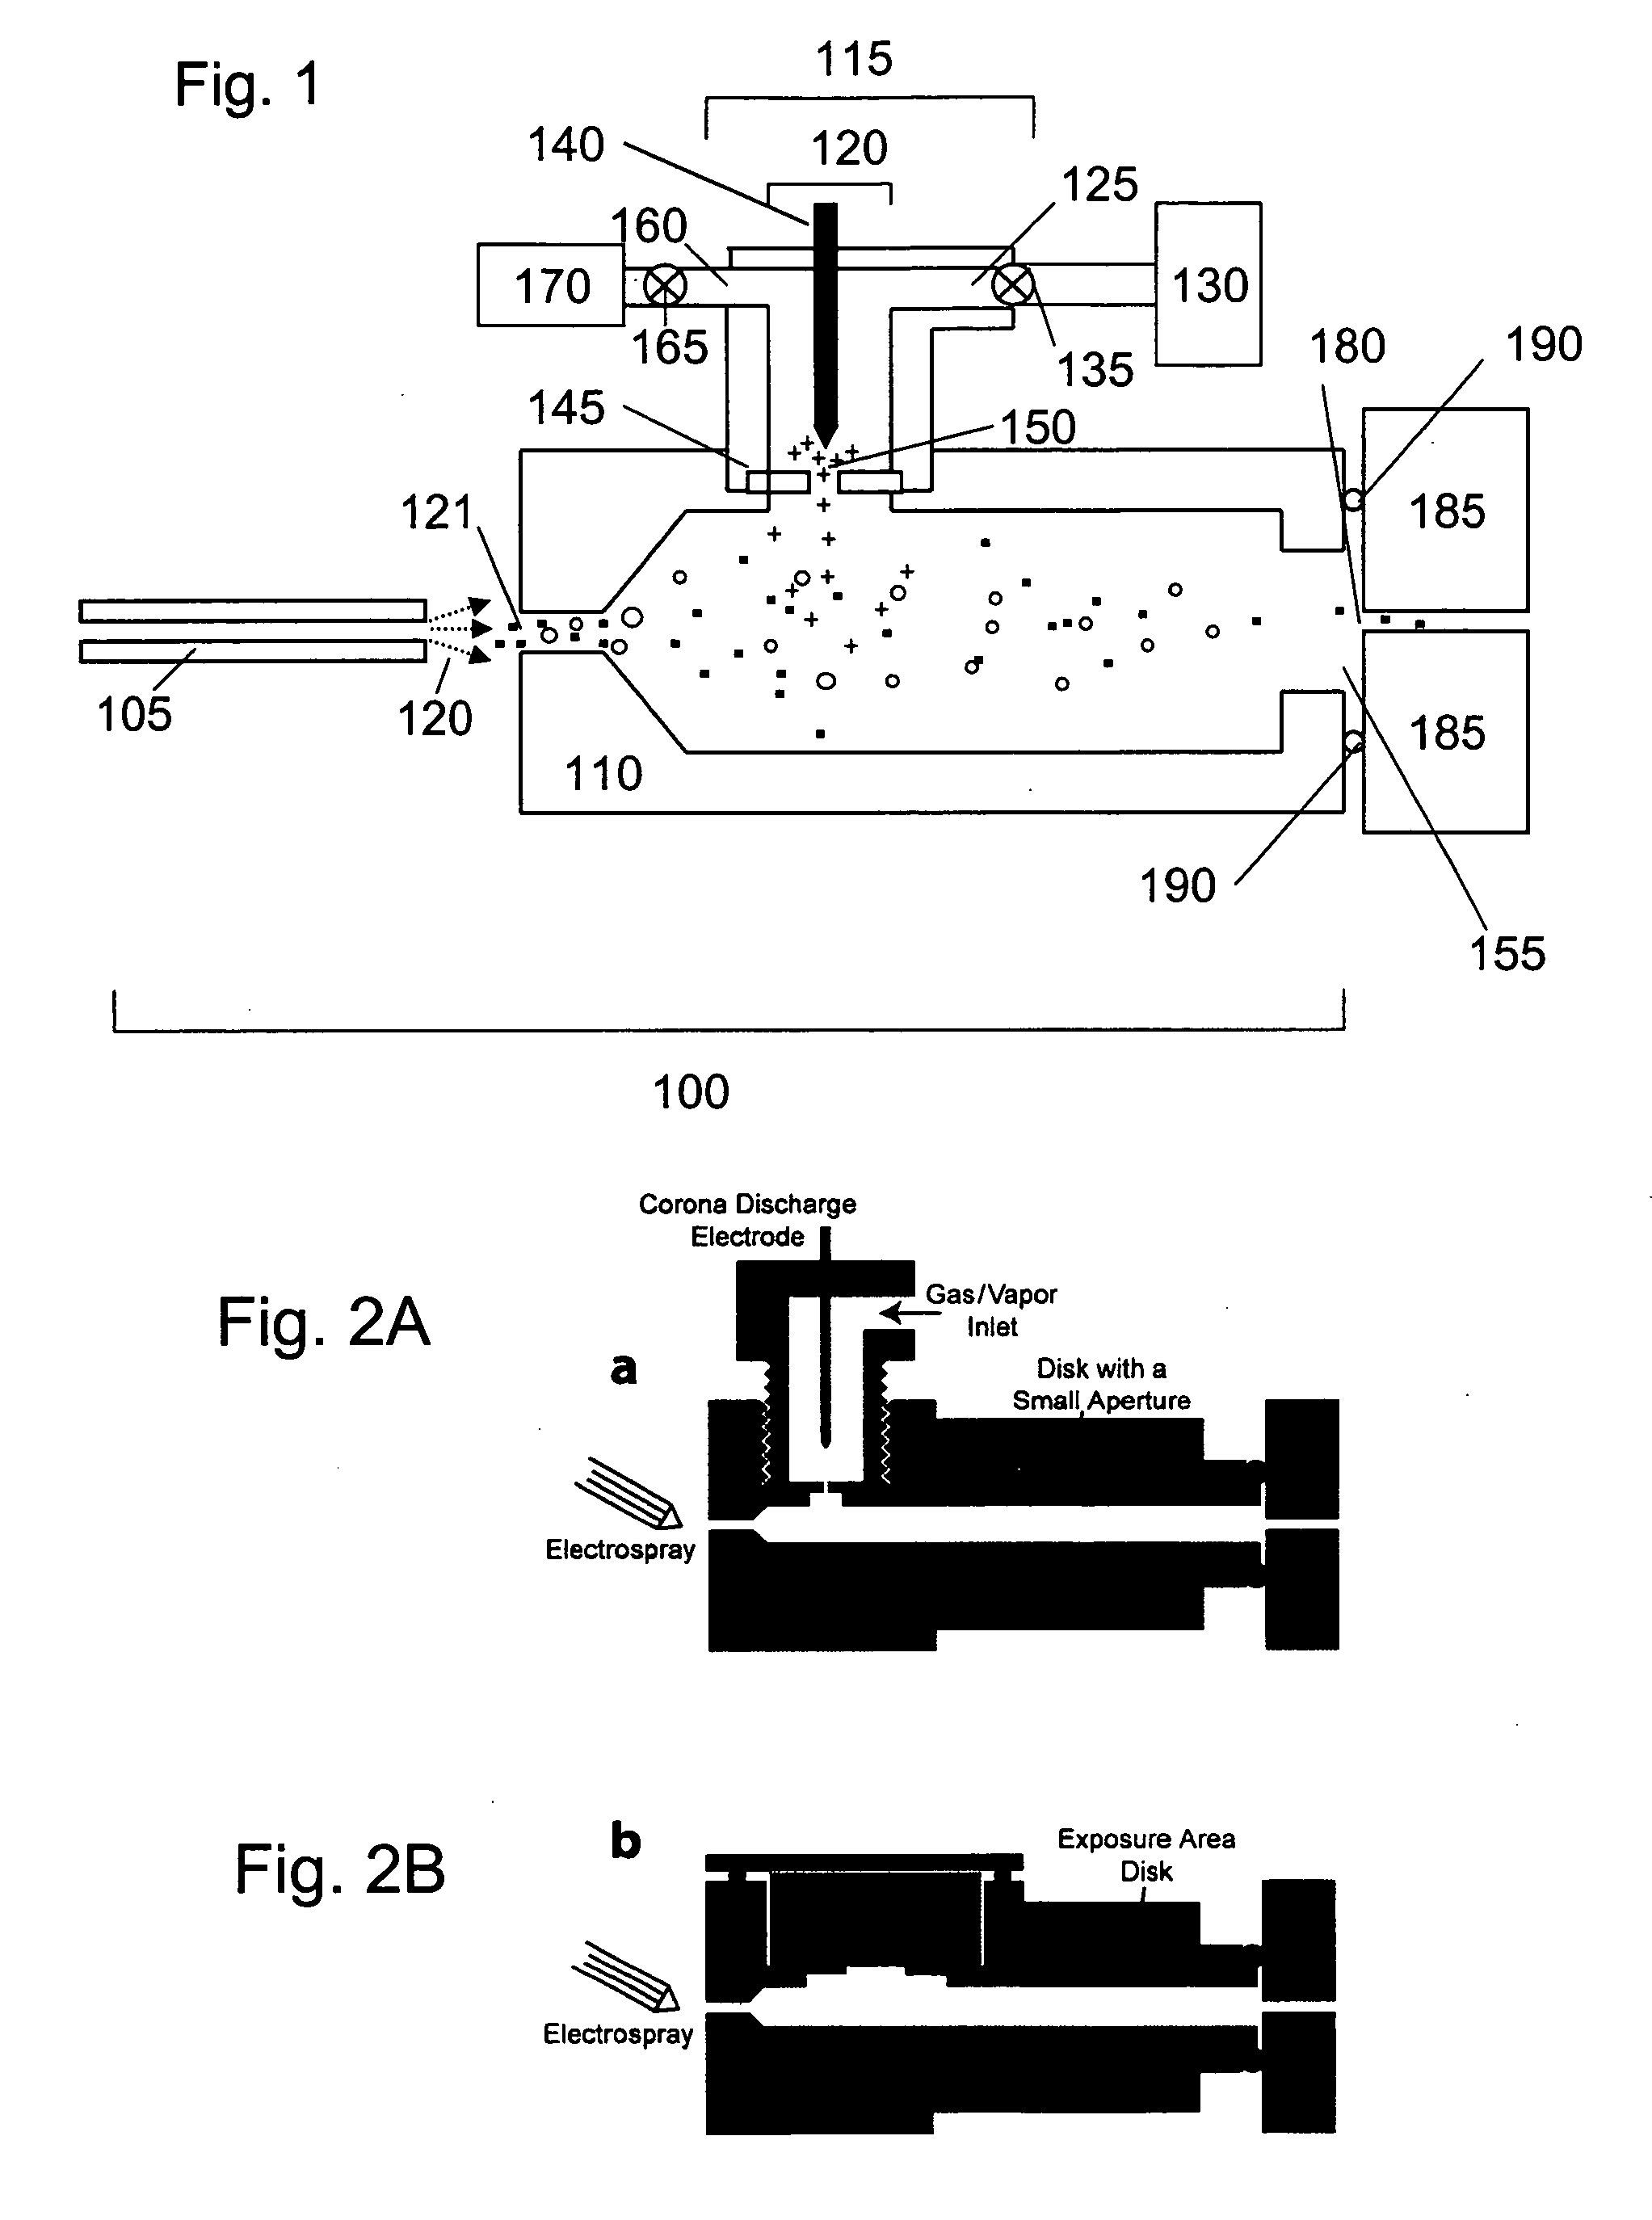 Electrospray ionization ion source with tunable charge reduction